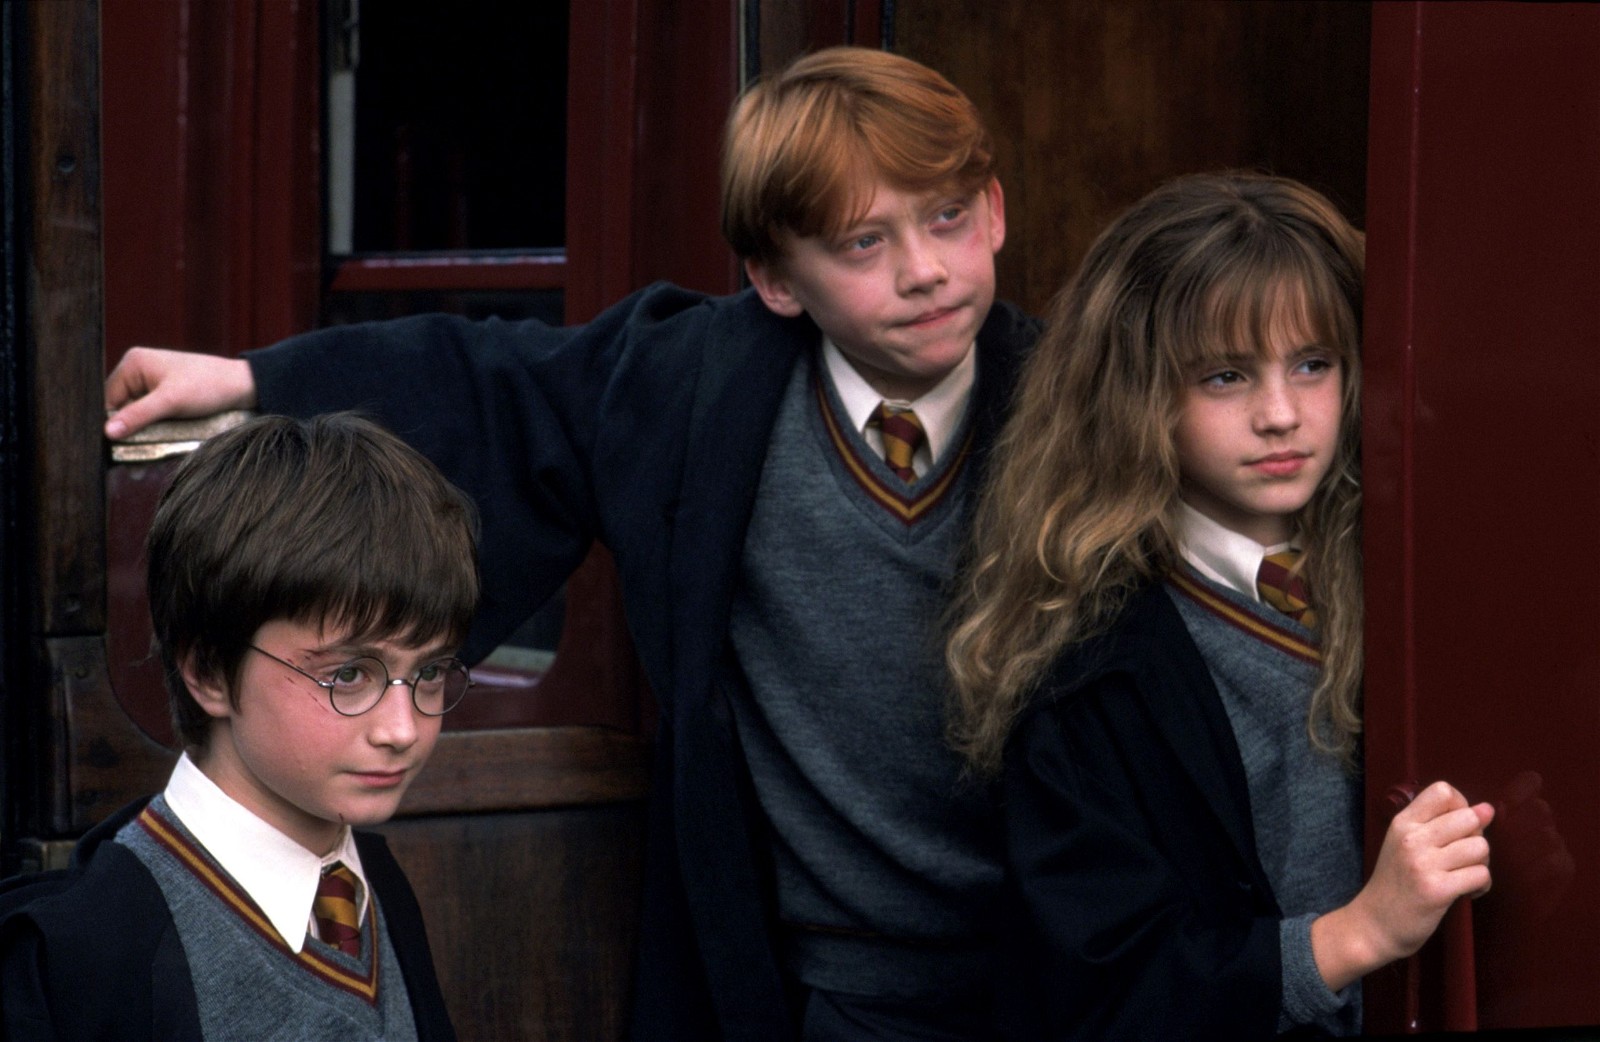 Harry, Hermione and Ron's frienship has been the emotional core of the Harry Potter franchise